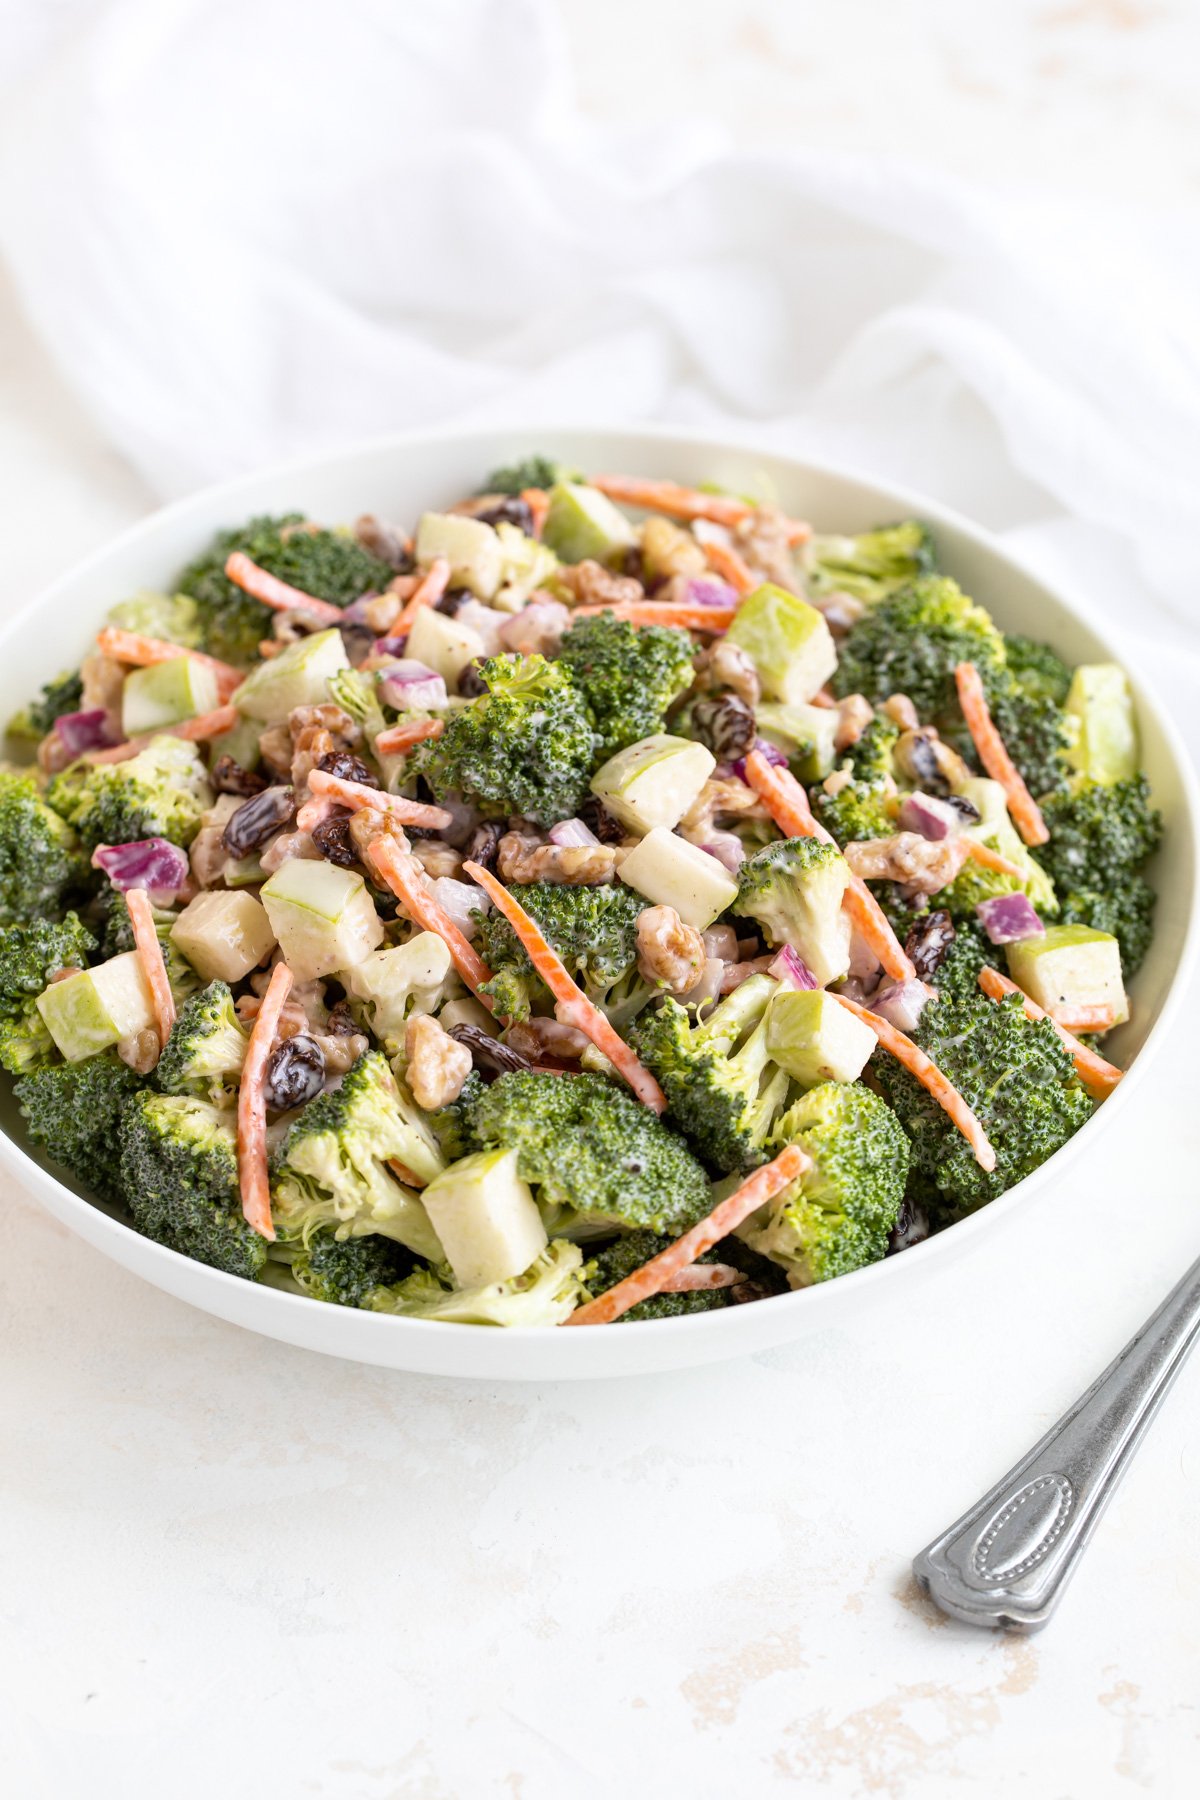 Creamy broccoli salad in a white bowl beside a white napkin and a spoon.